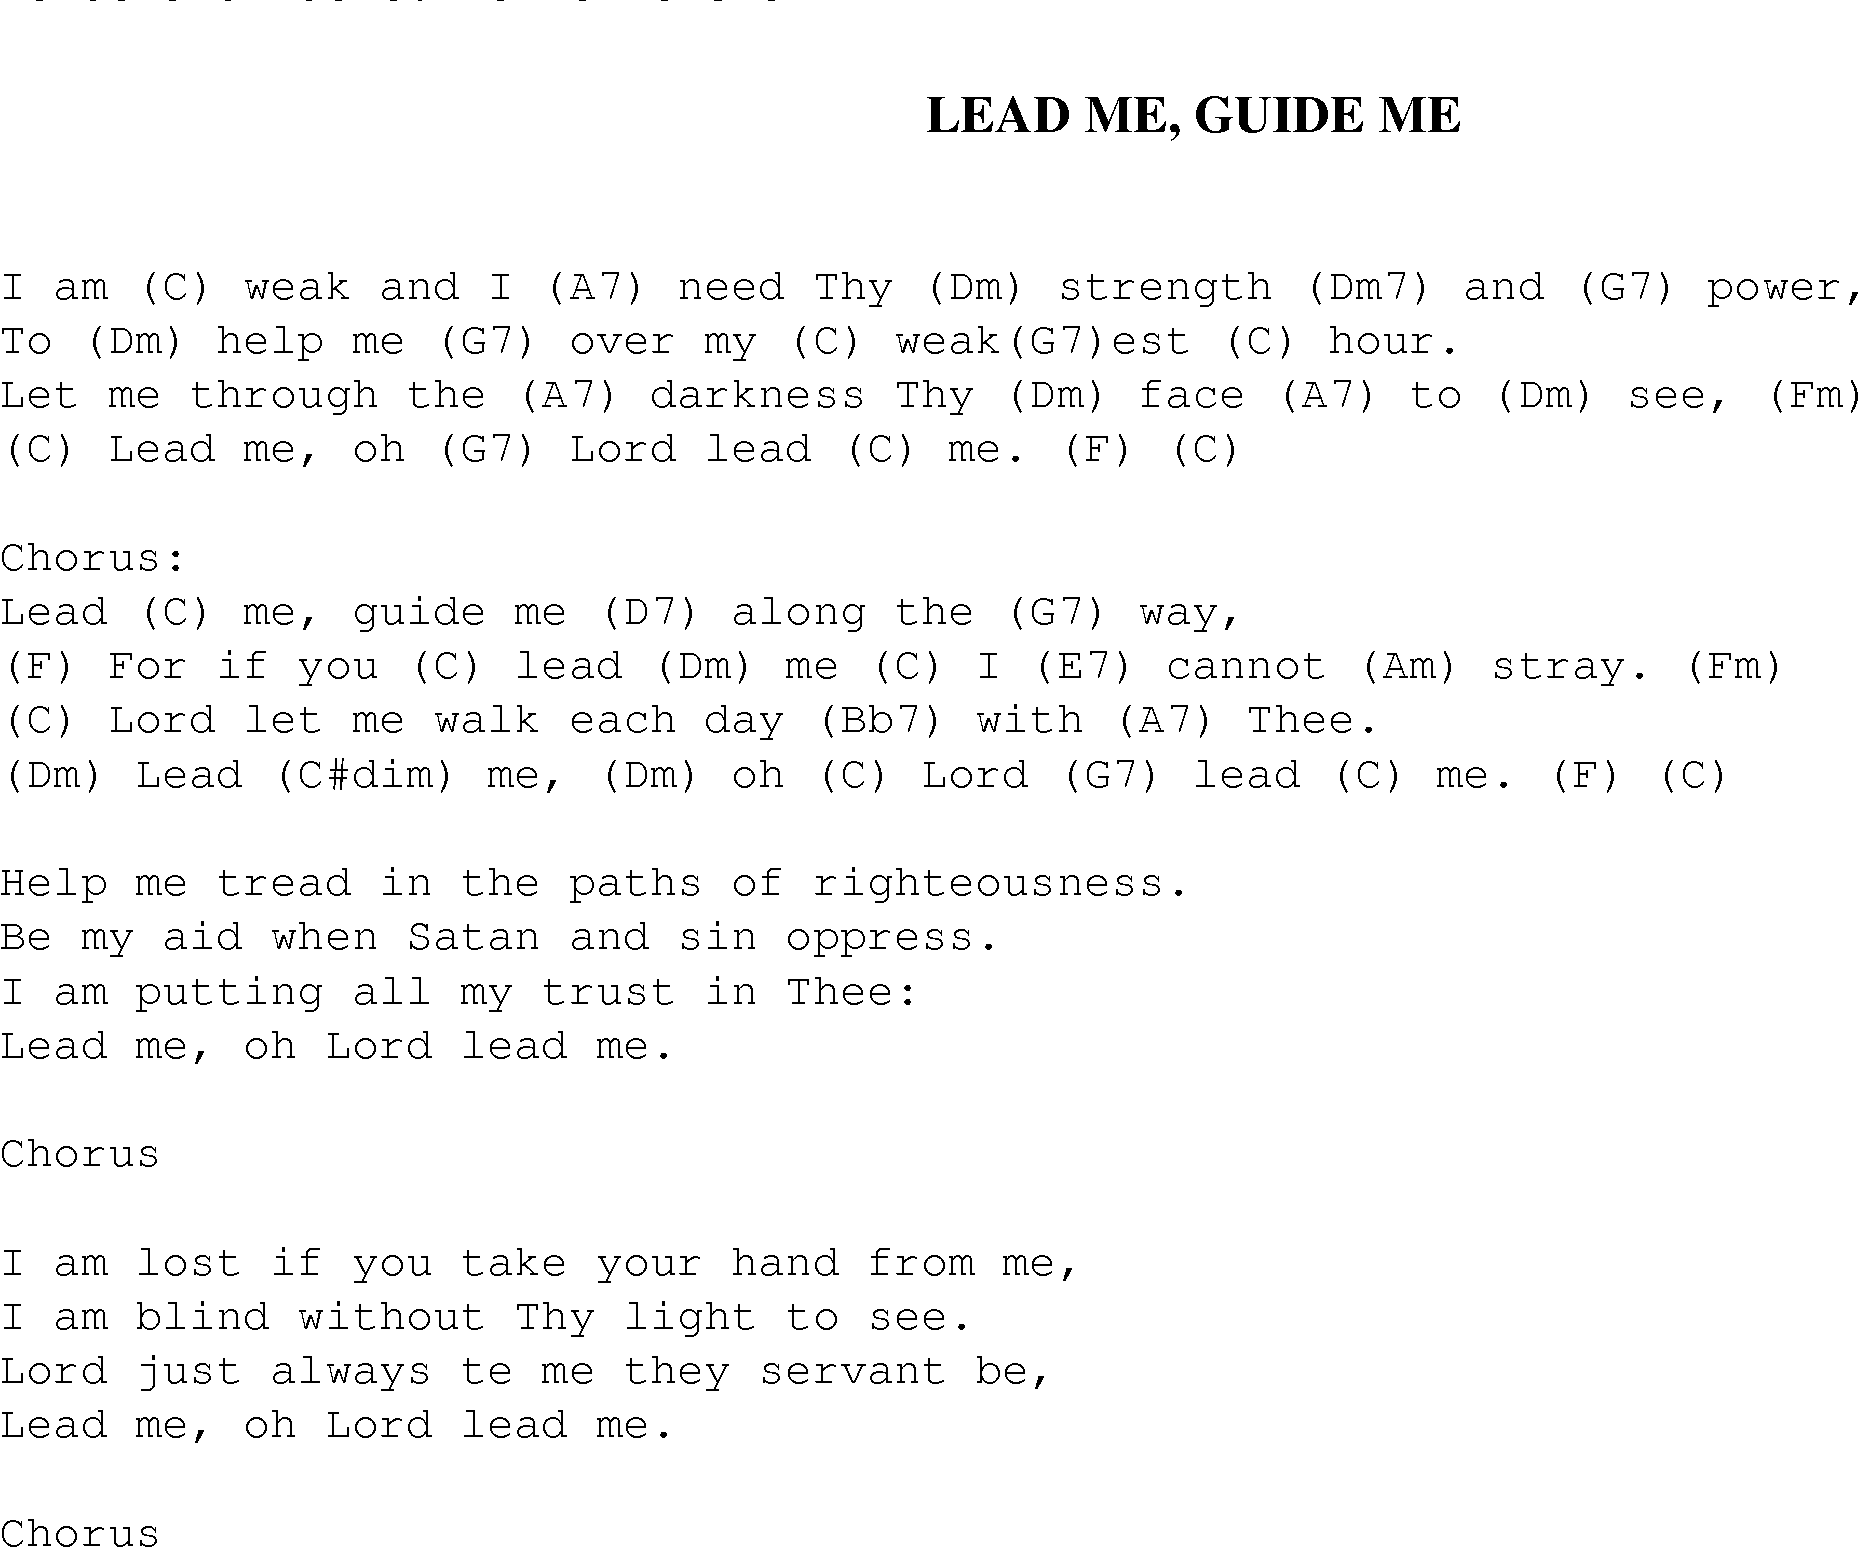 Gospel Song: lead_me_guide_me, lyrics and chords.